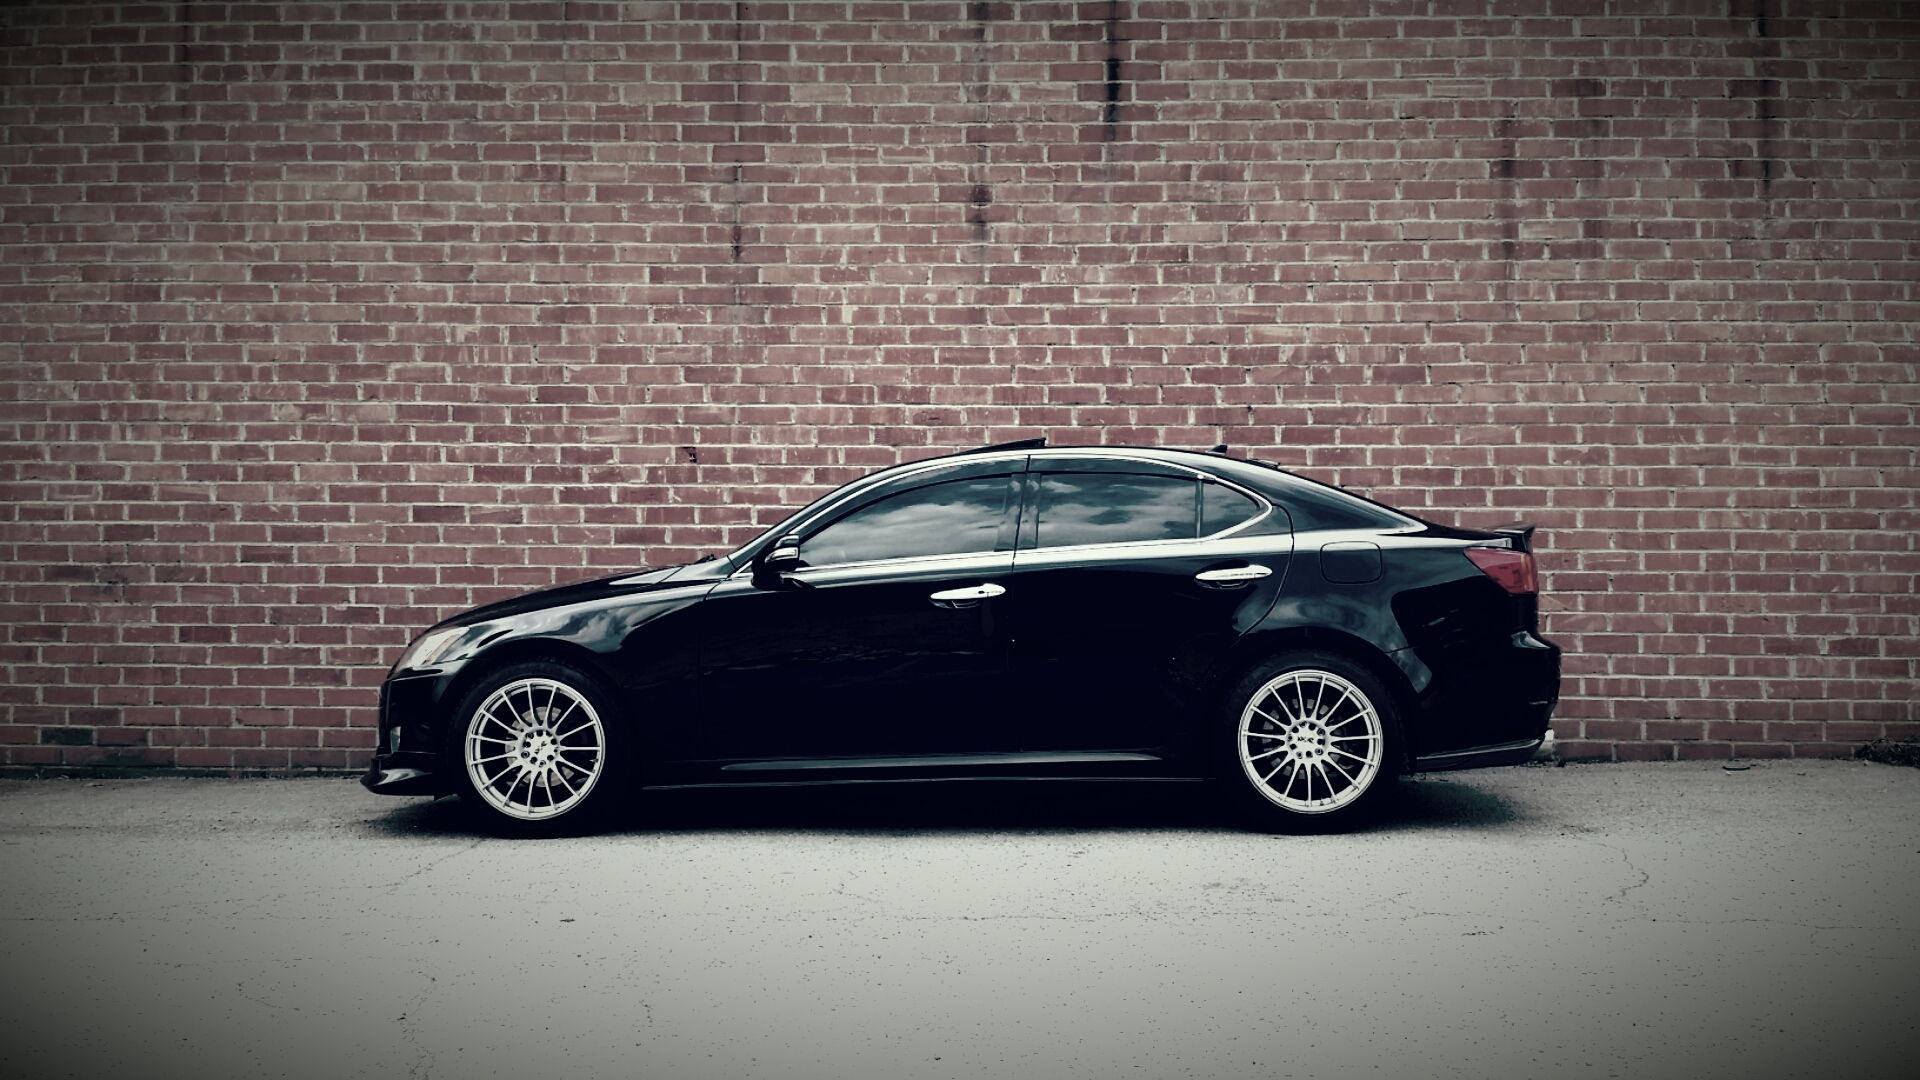 MY RIDE! A Modified 2010 Lexus IS 250